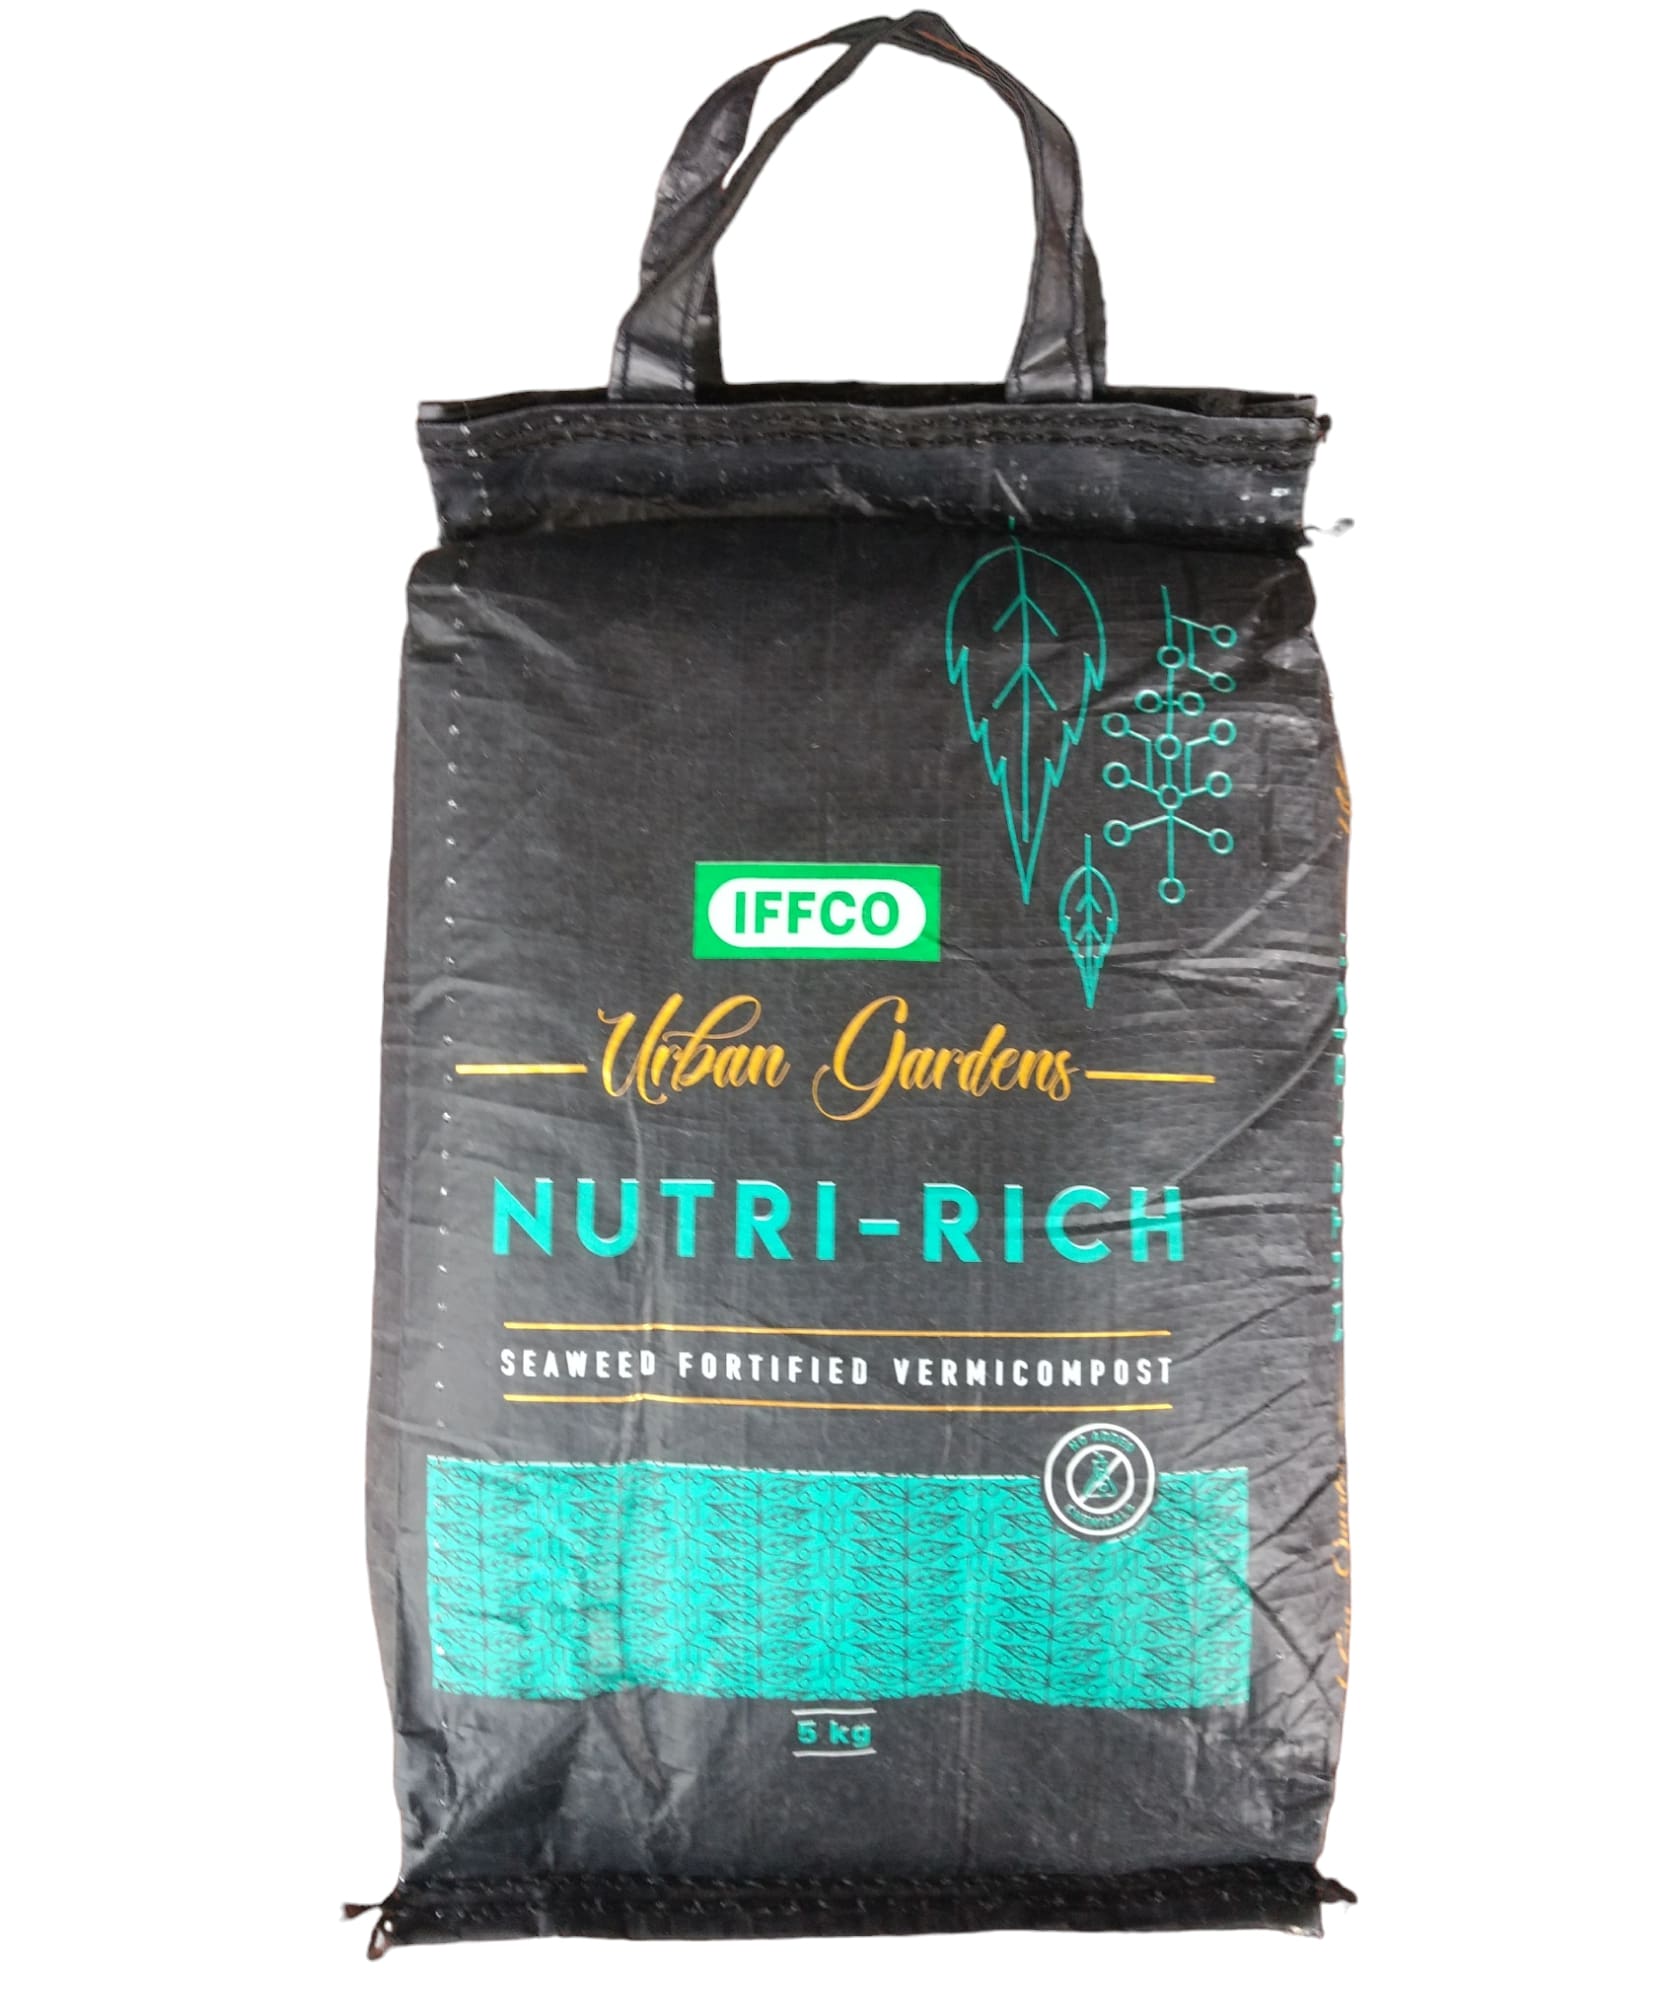 IFFCO Nutri rich Seaweed fortified Vermicompost